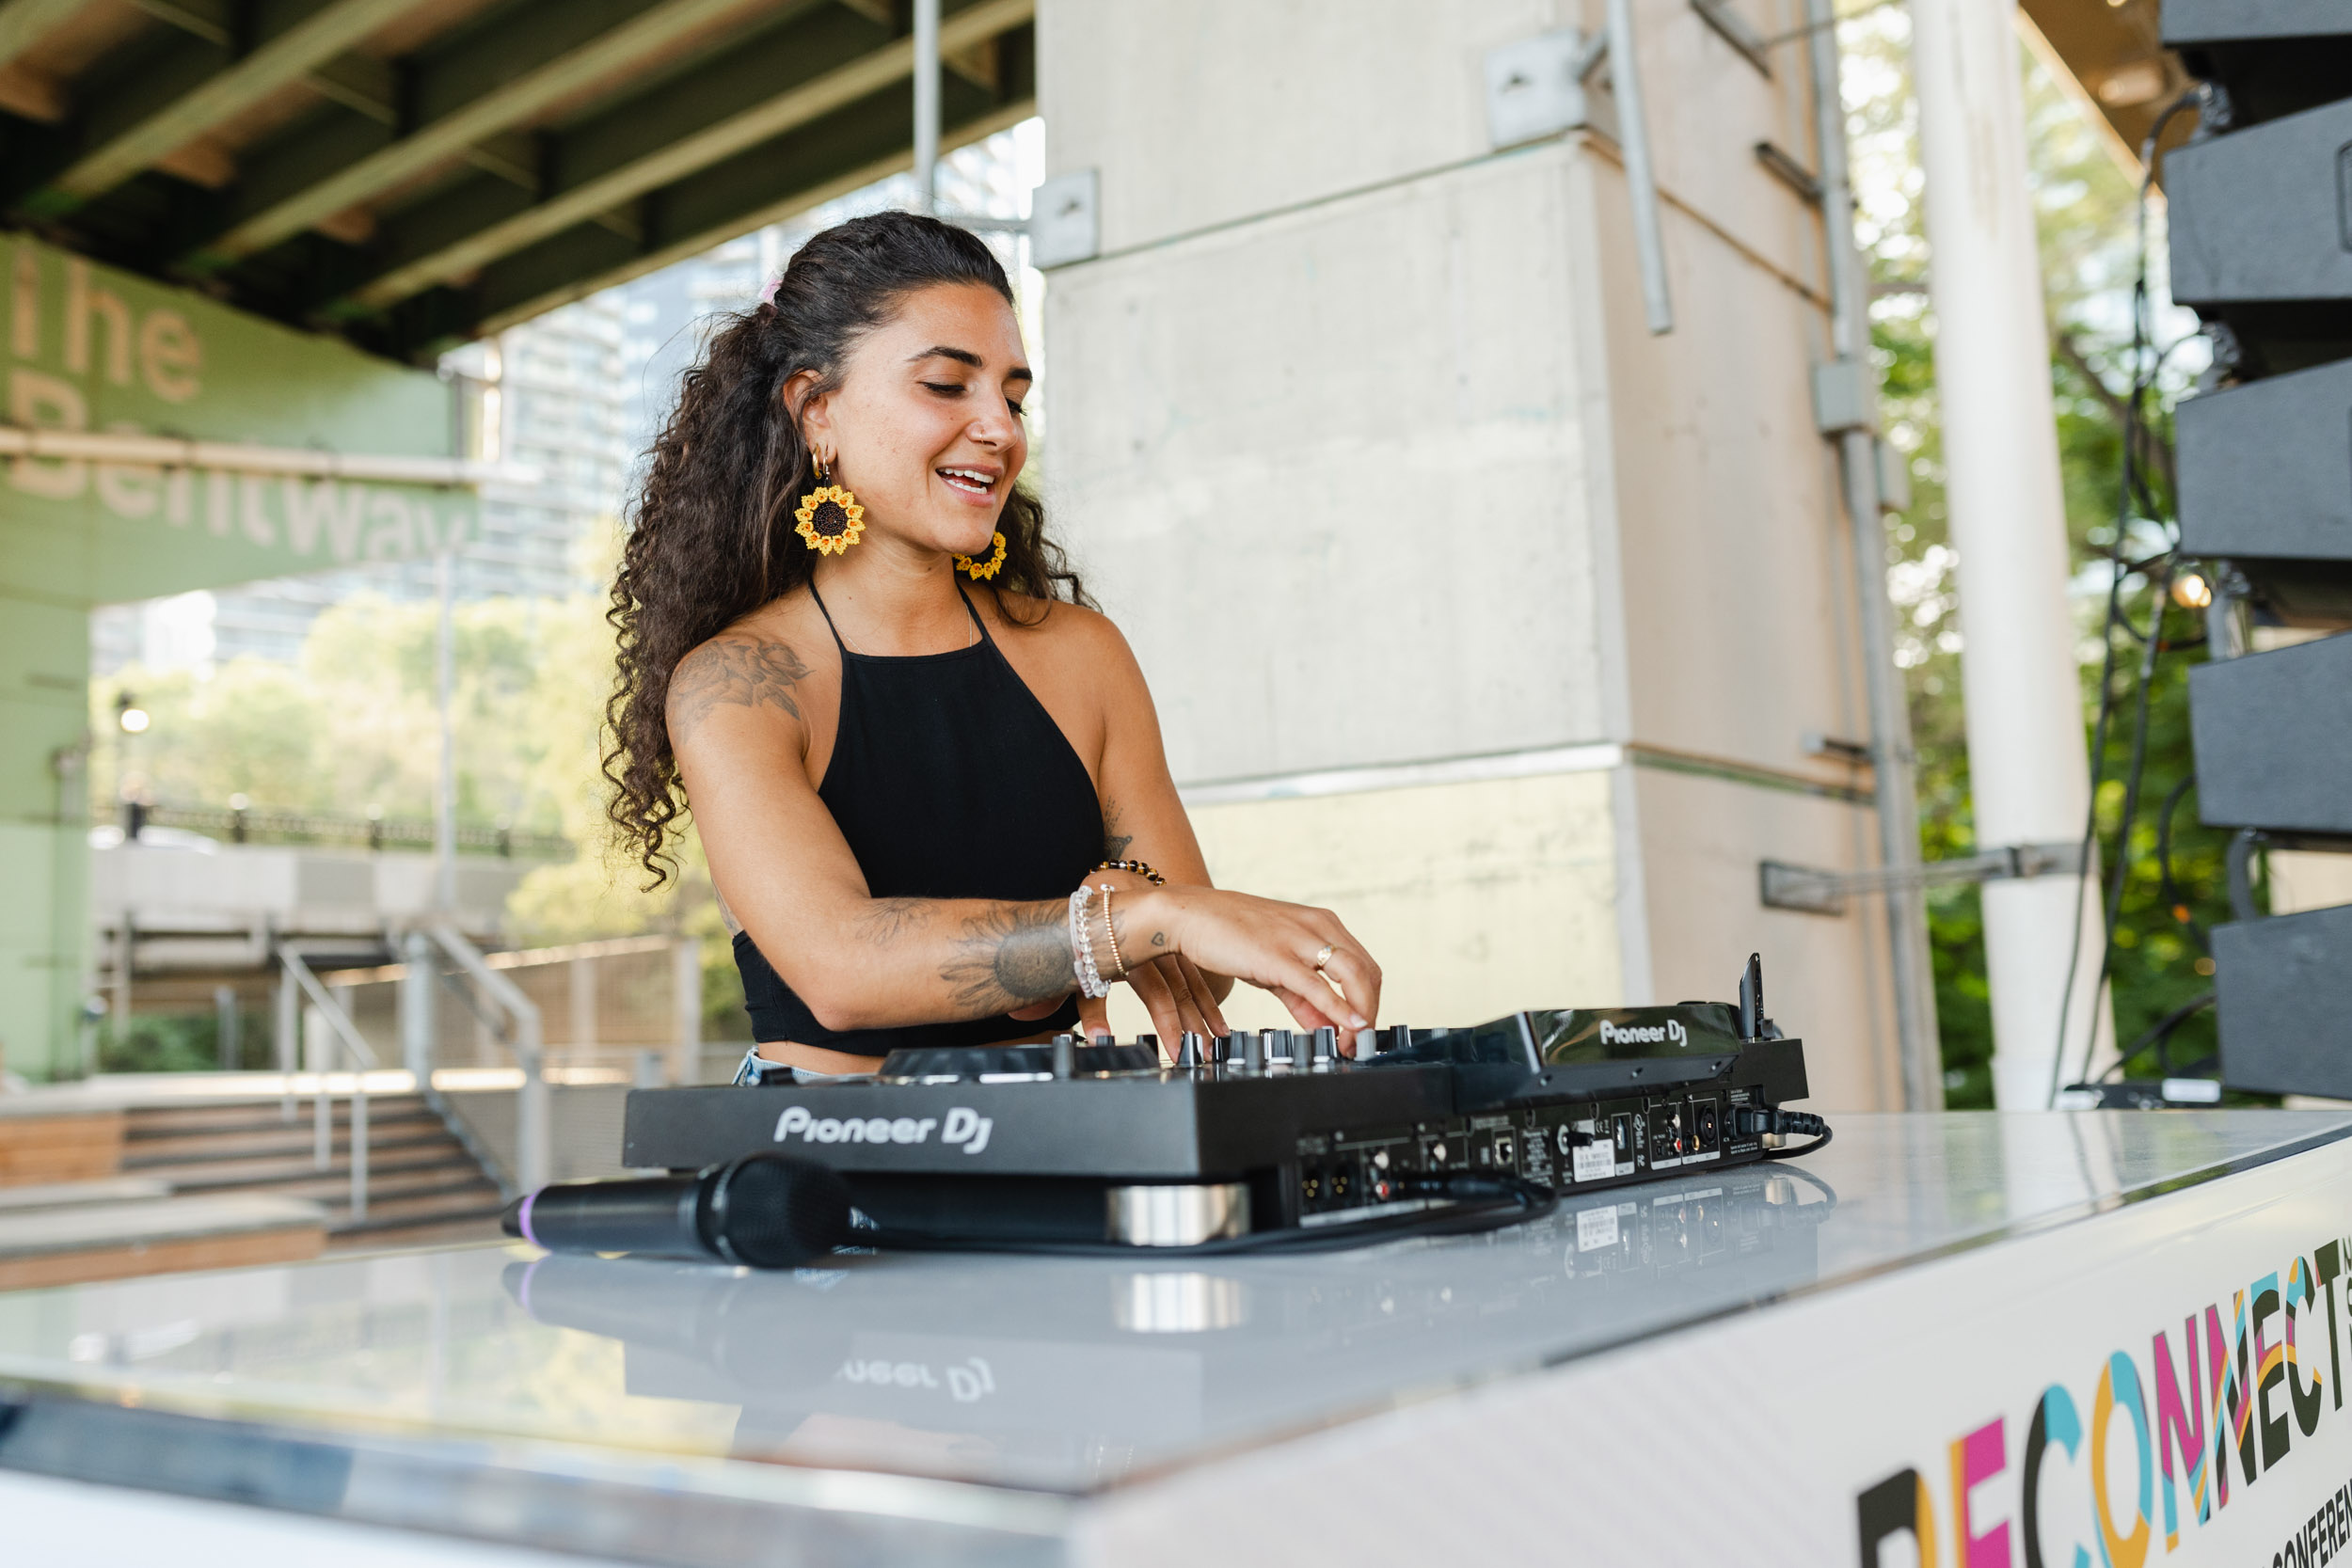 A woman performing as a DJ at an outdoor conference.